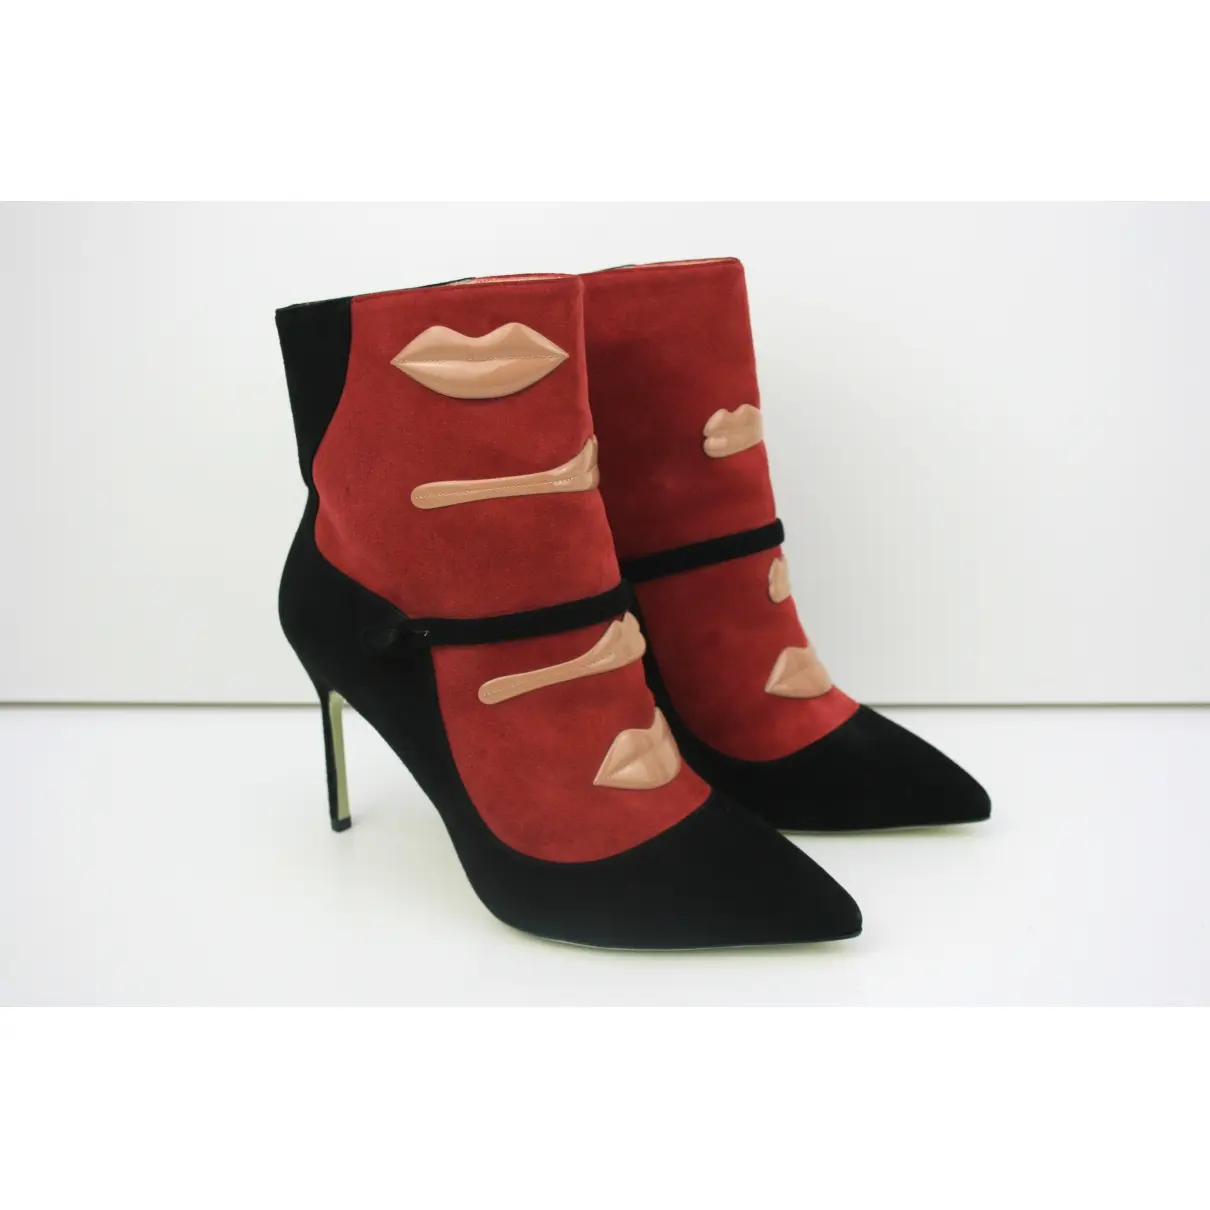 Buy Giannico Ankle boots online